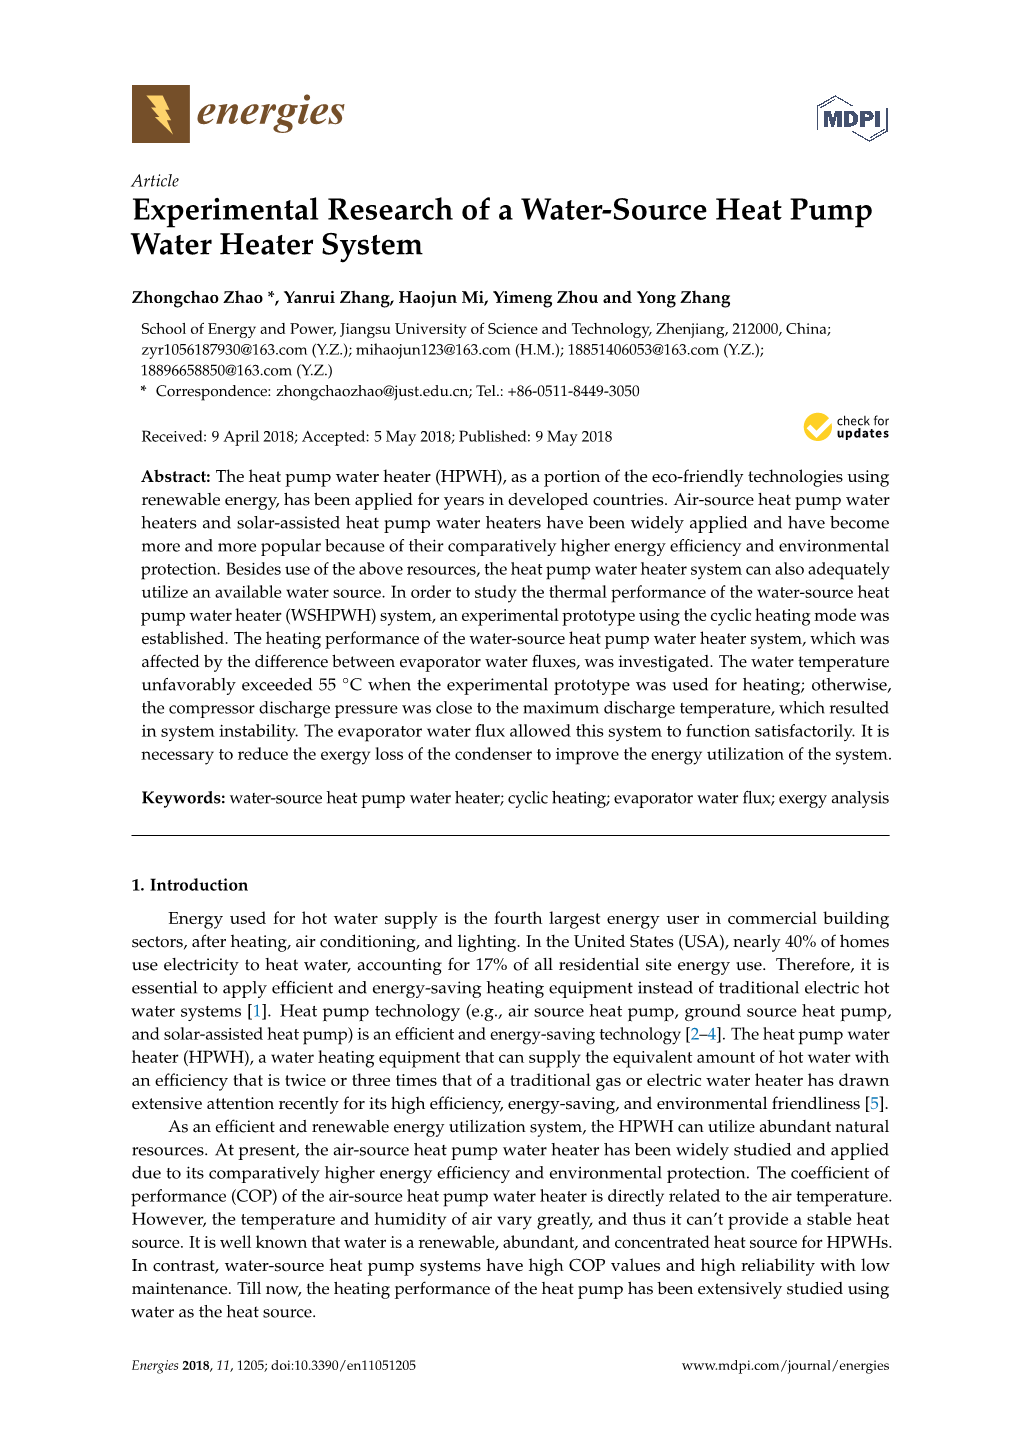 Experimental Research of a Water-Source Heat Pump Water Heater System